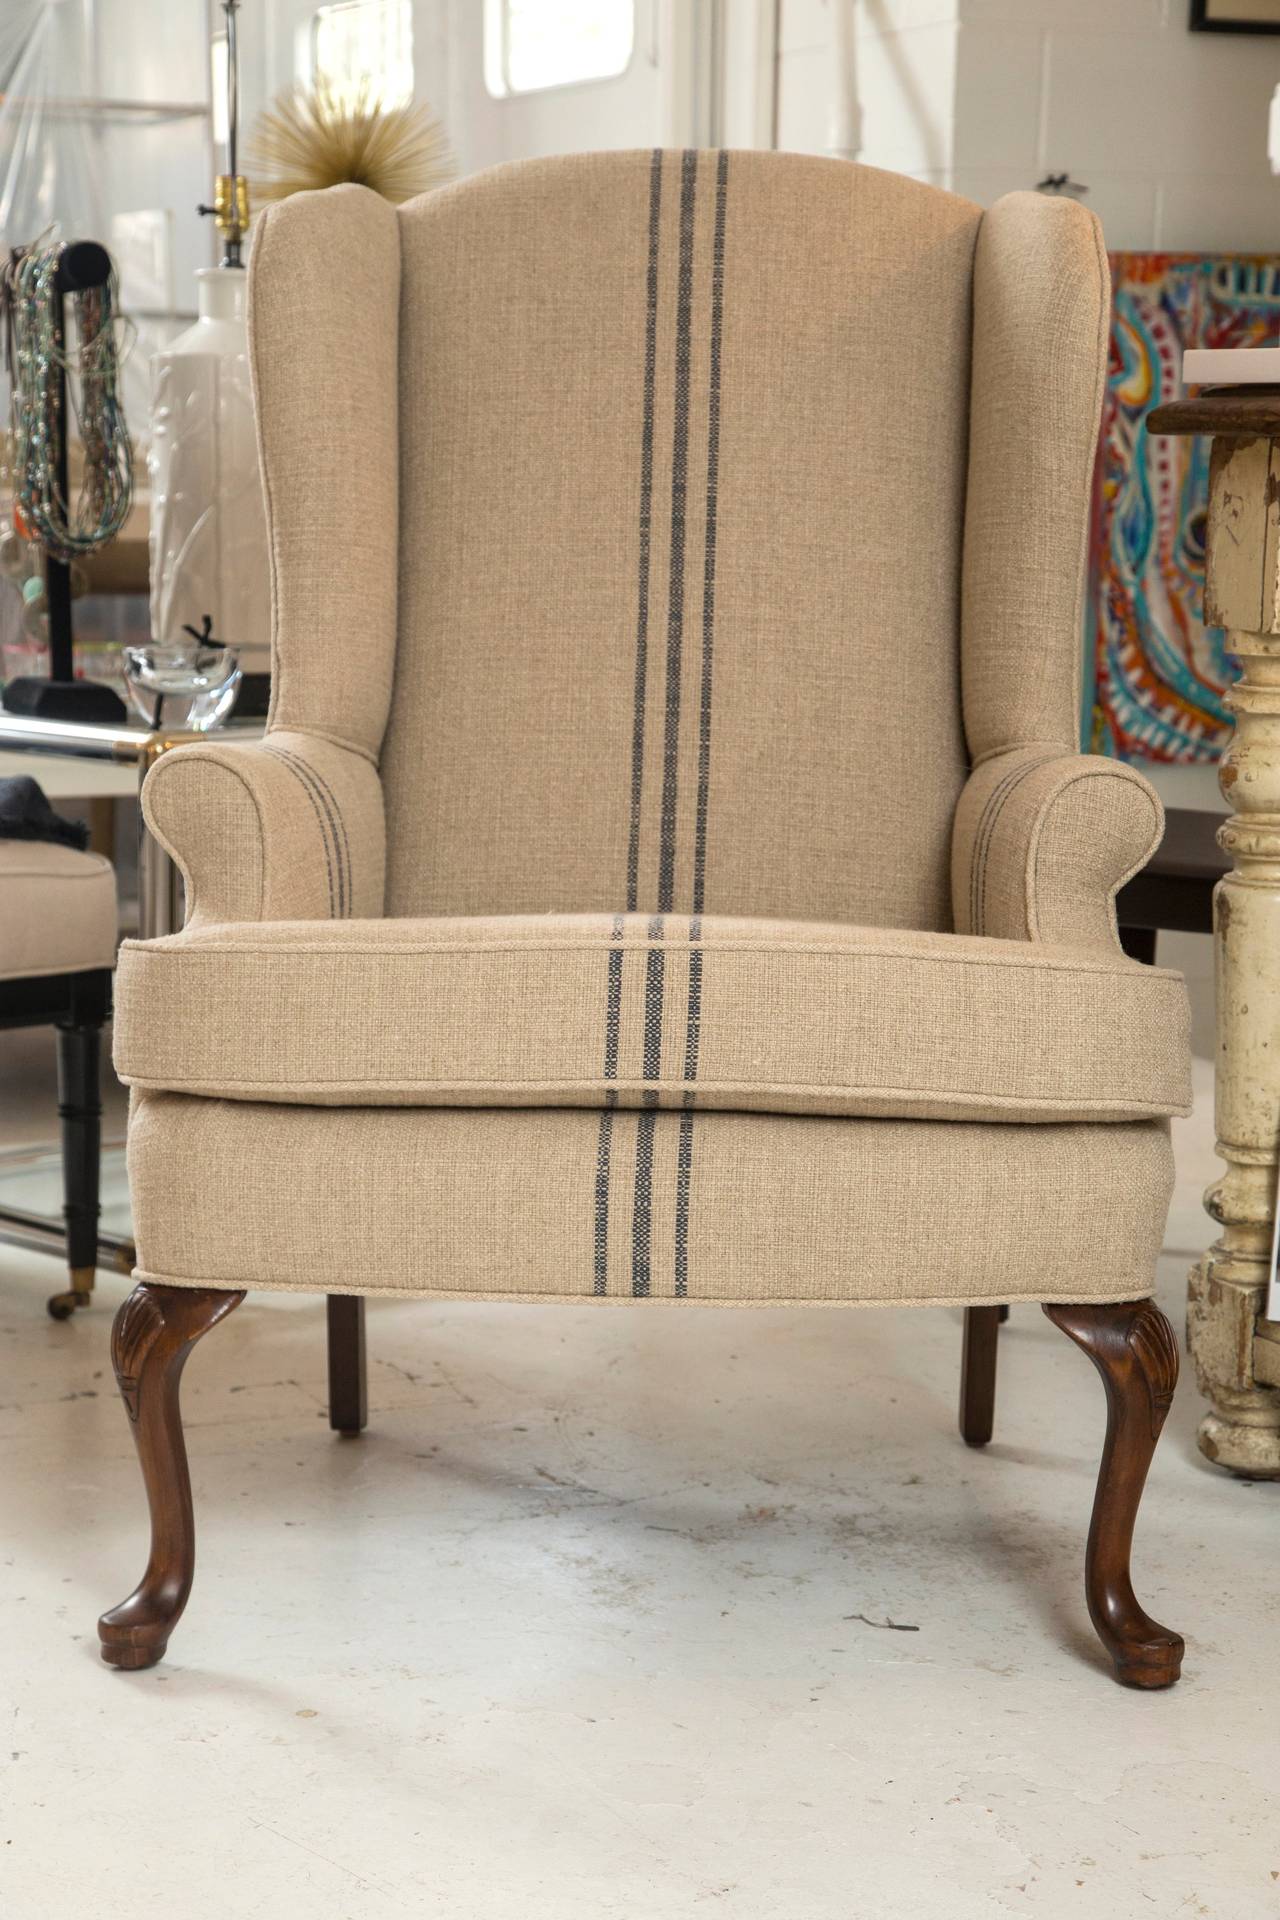 Well made and very comfortable Classic wing chair. Custom upholstered in French ticking. Nicely tailored, and fits nicely in any number of applications.